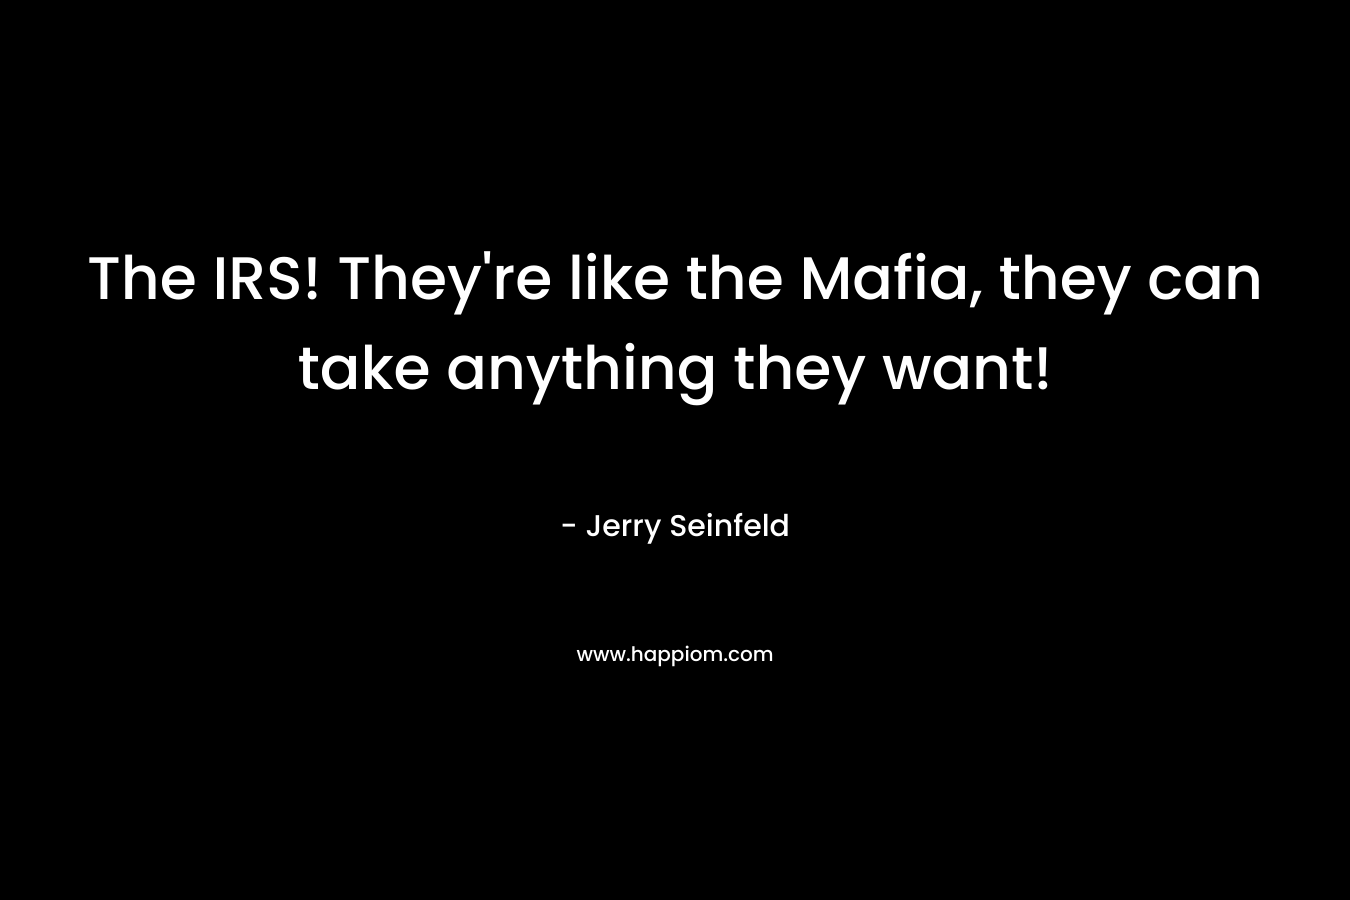 The IRS! They’re like the Mafia, they can take anything they want! – Jerry Seinfeld